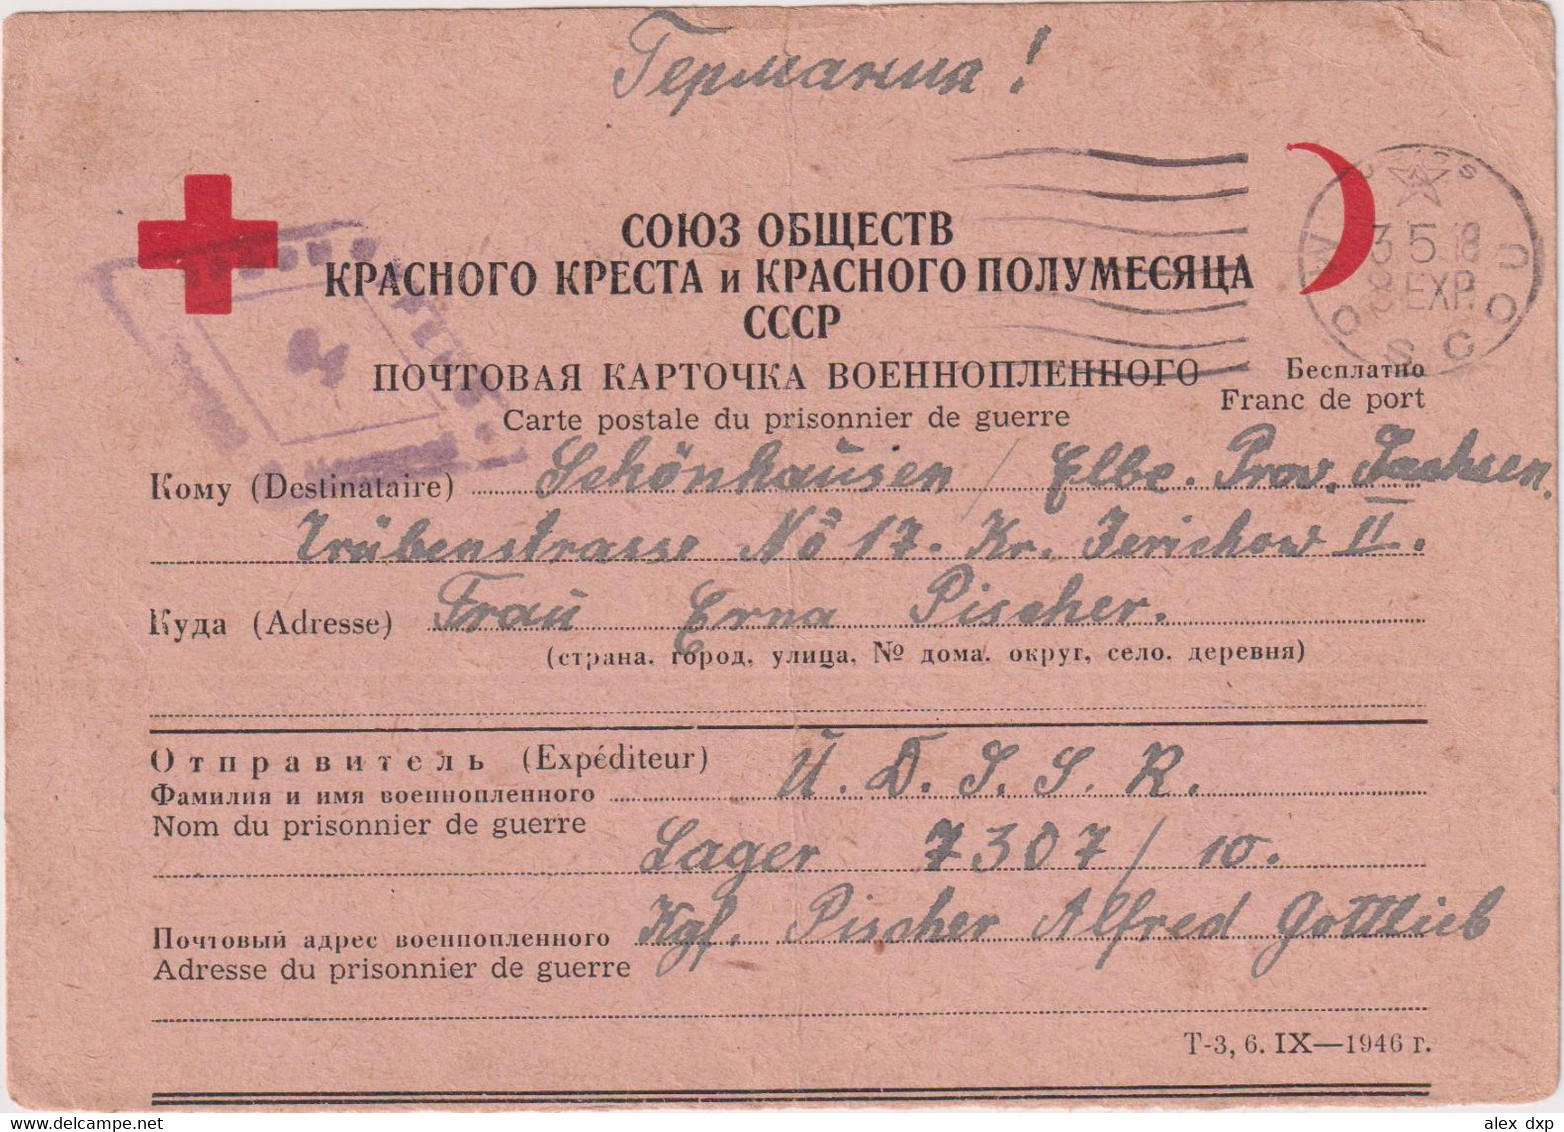 RUSSIA (USSR) > 1948 POSTAL HISTORY > POW RED CROSS CARD FROM POW CAMP 7307/10 TO SCHOHAUSEN, GERMANY - Lettres & Documents